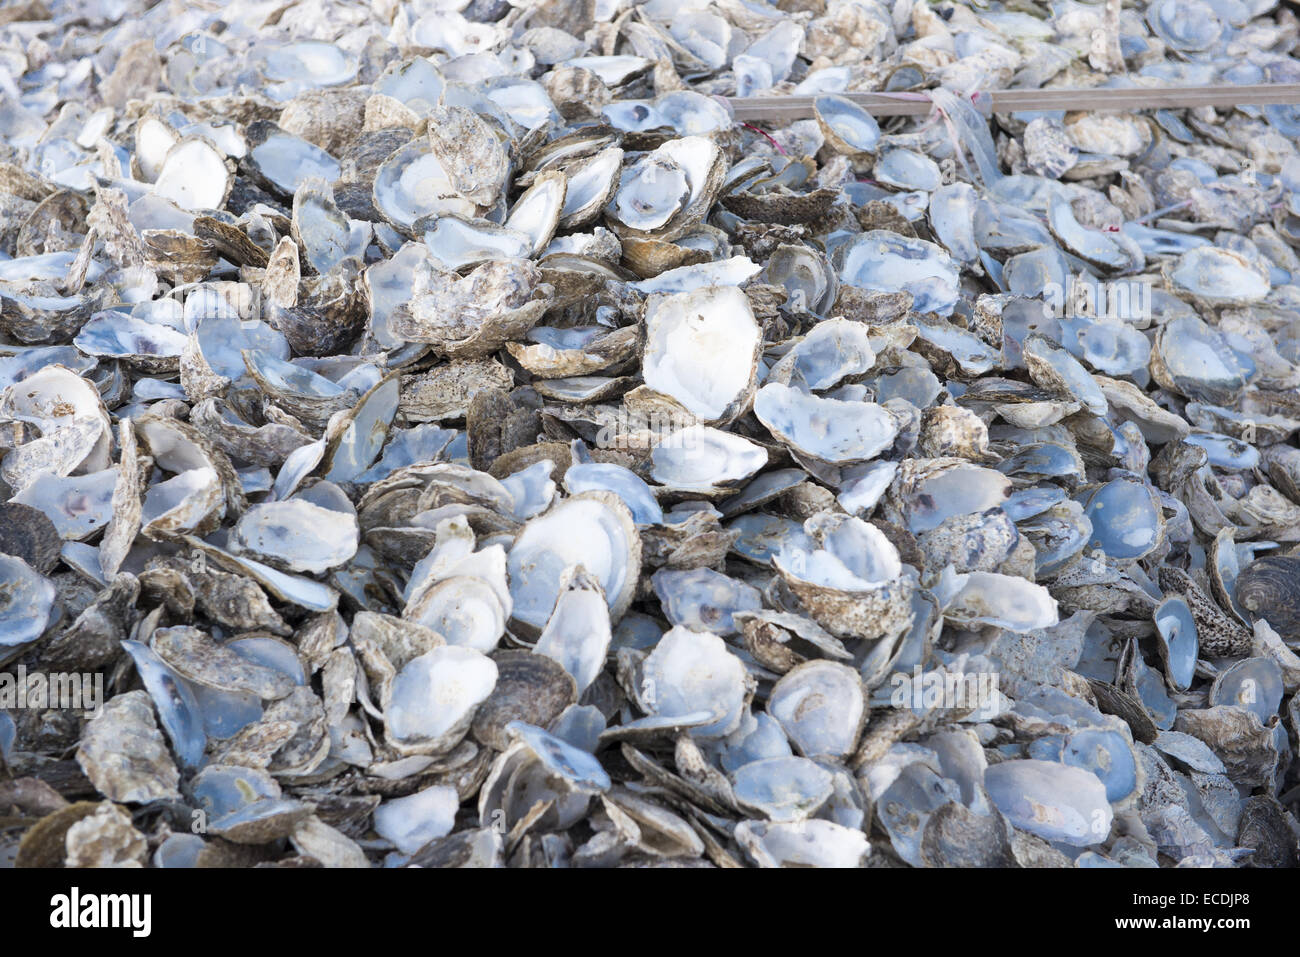 Oyster shells piled on the beach for recycling at Whitstable Bay, Kent, England Stock Photo